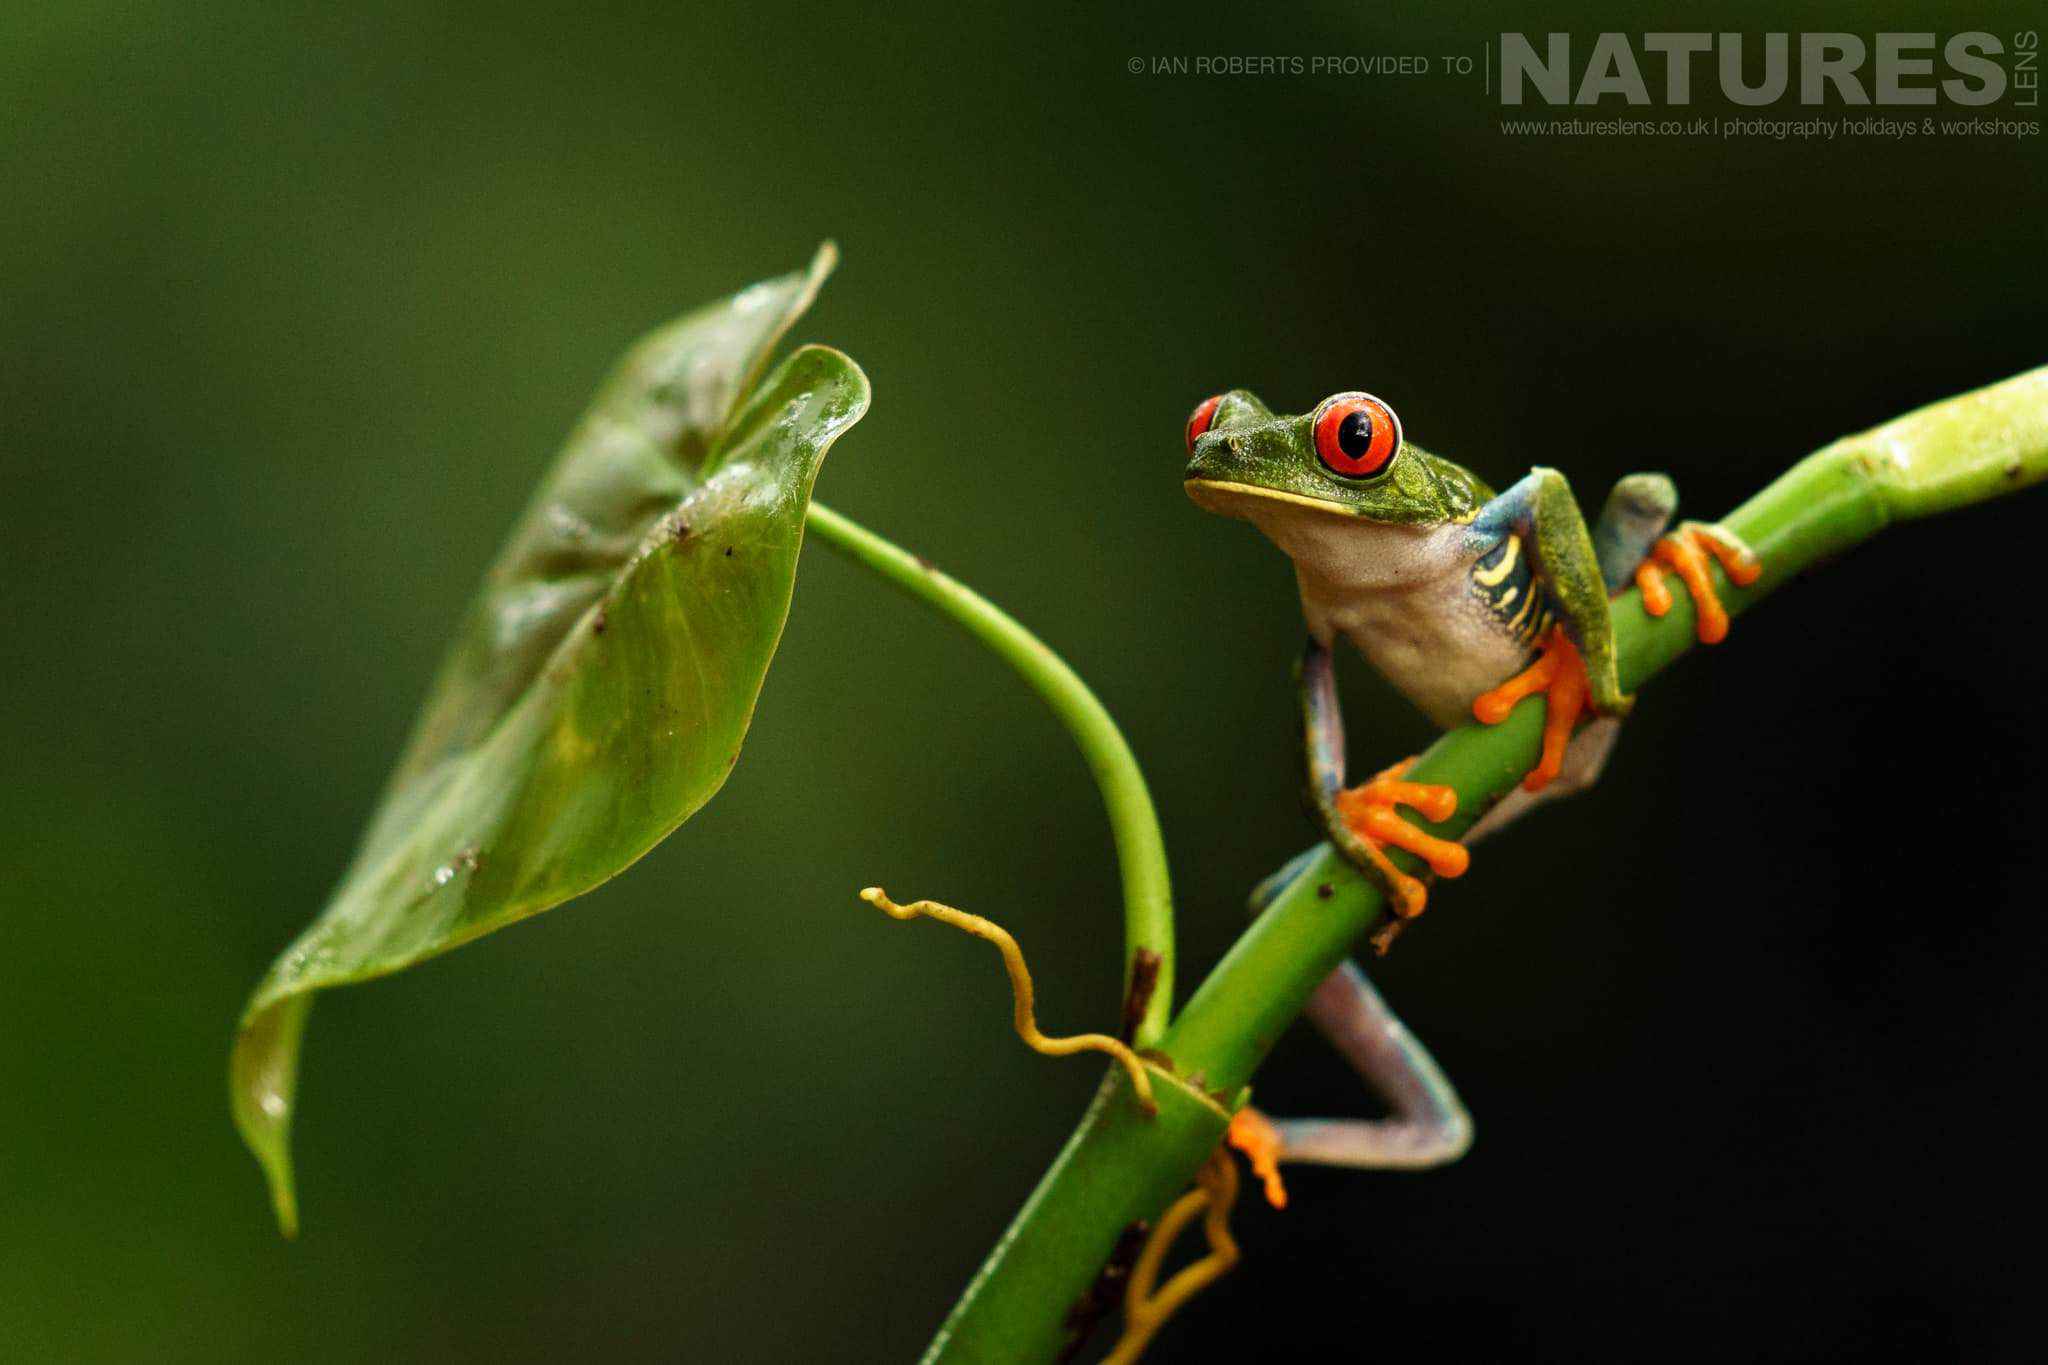 A Red Eyed Tree Frog Photograhed During A Natureslens Photography Tour Of Costa Rica